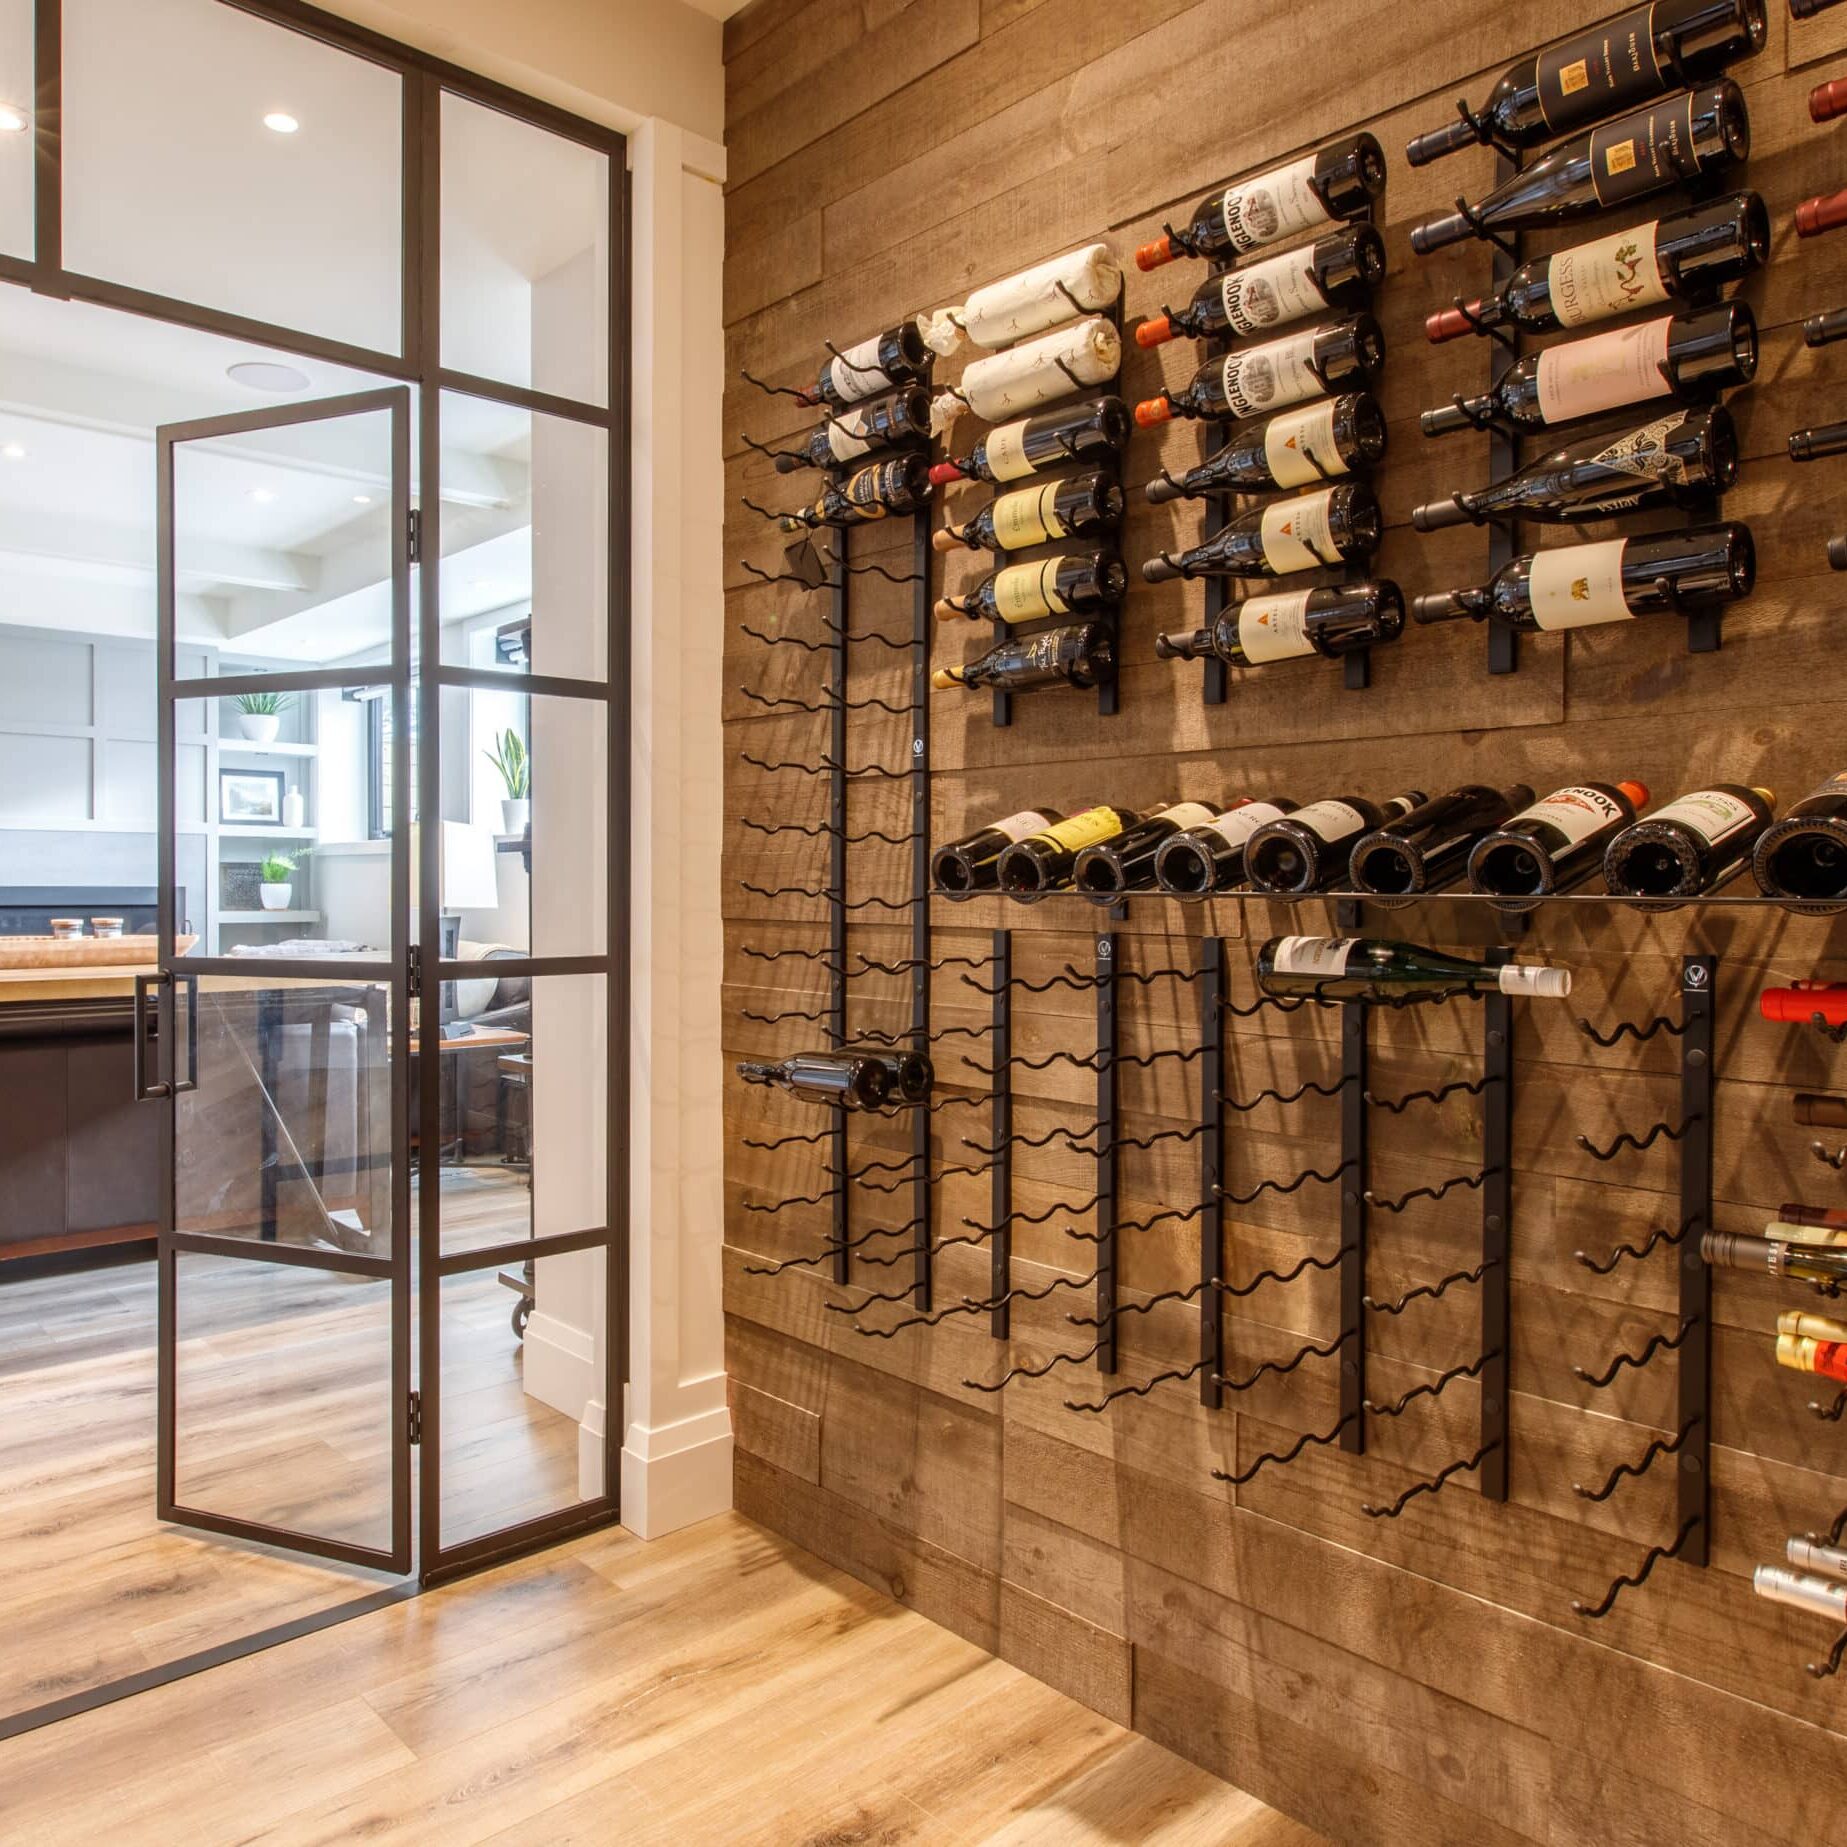 Wine room seen from inside and out towards kitchen with display